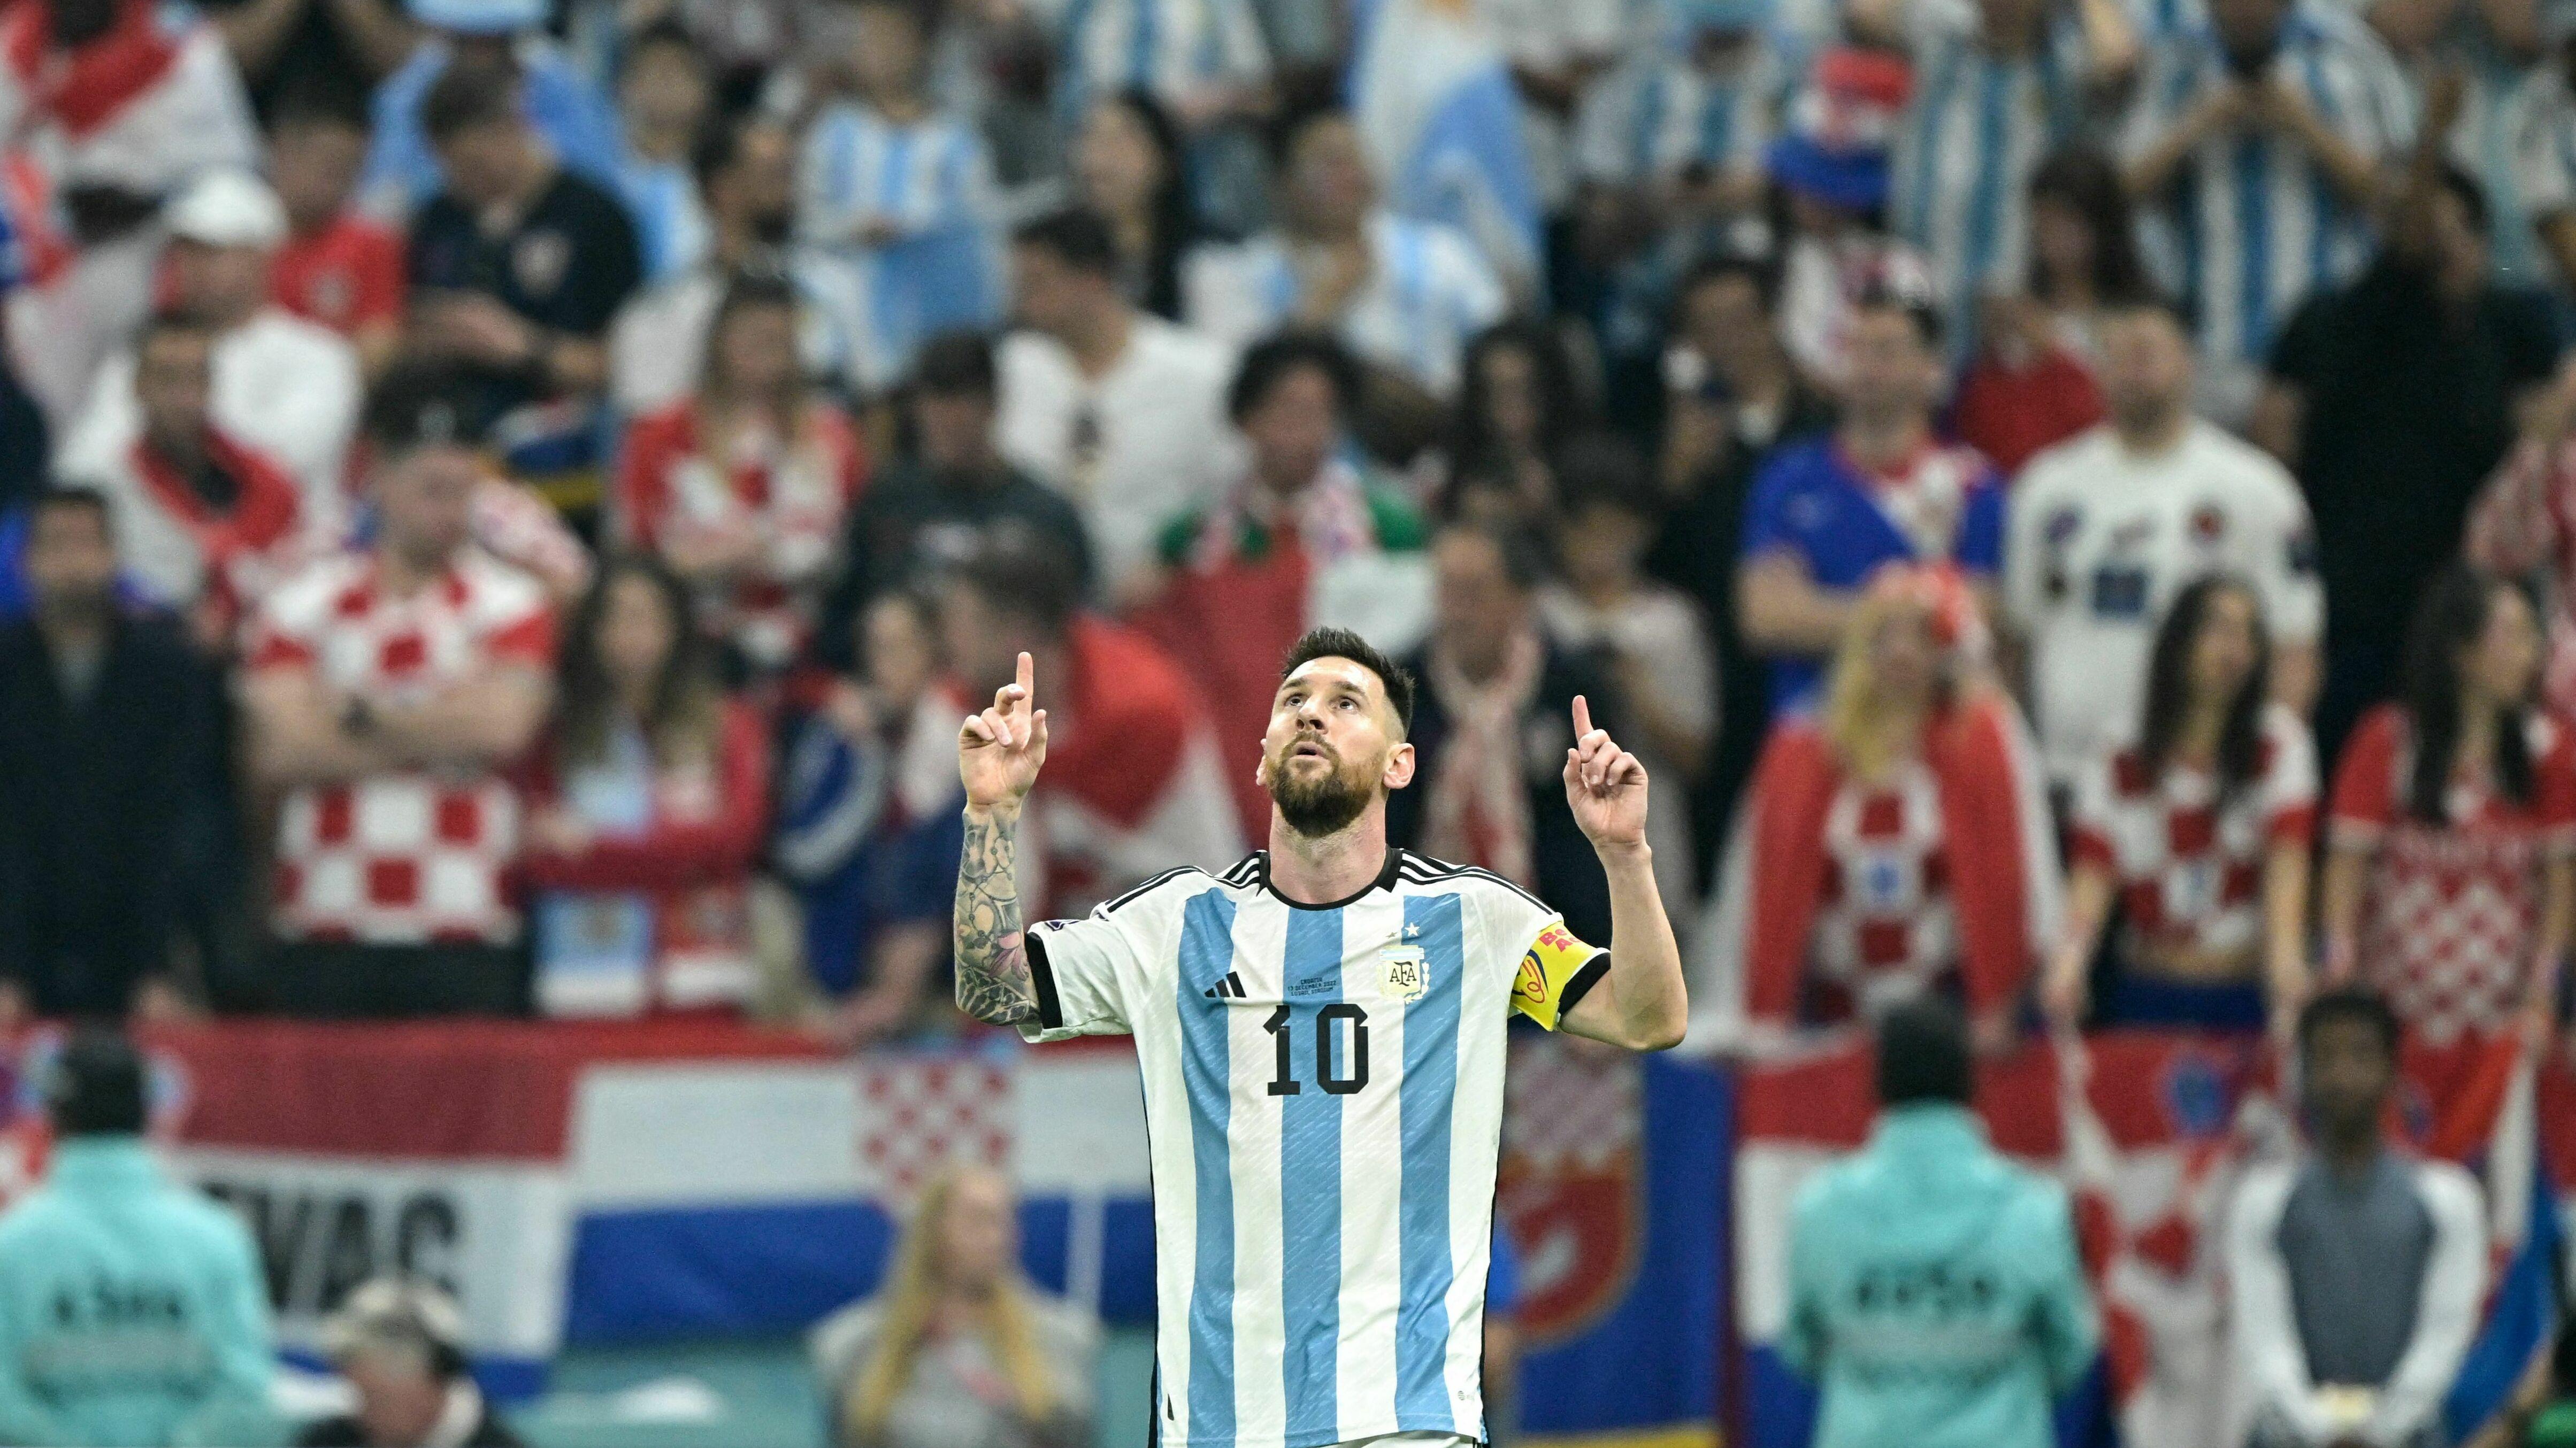 Messi S Dream Lives On As Argentina Defeats Croatia To Reach The